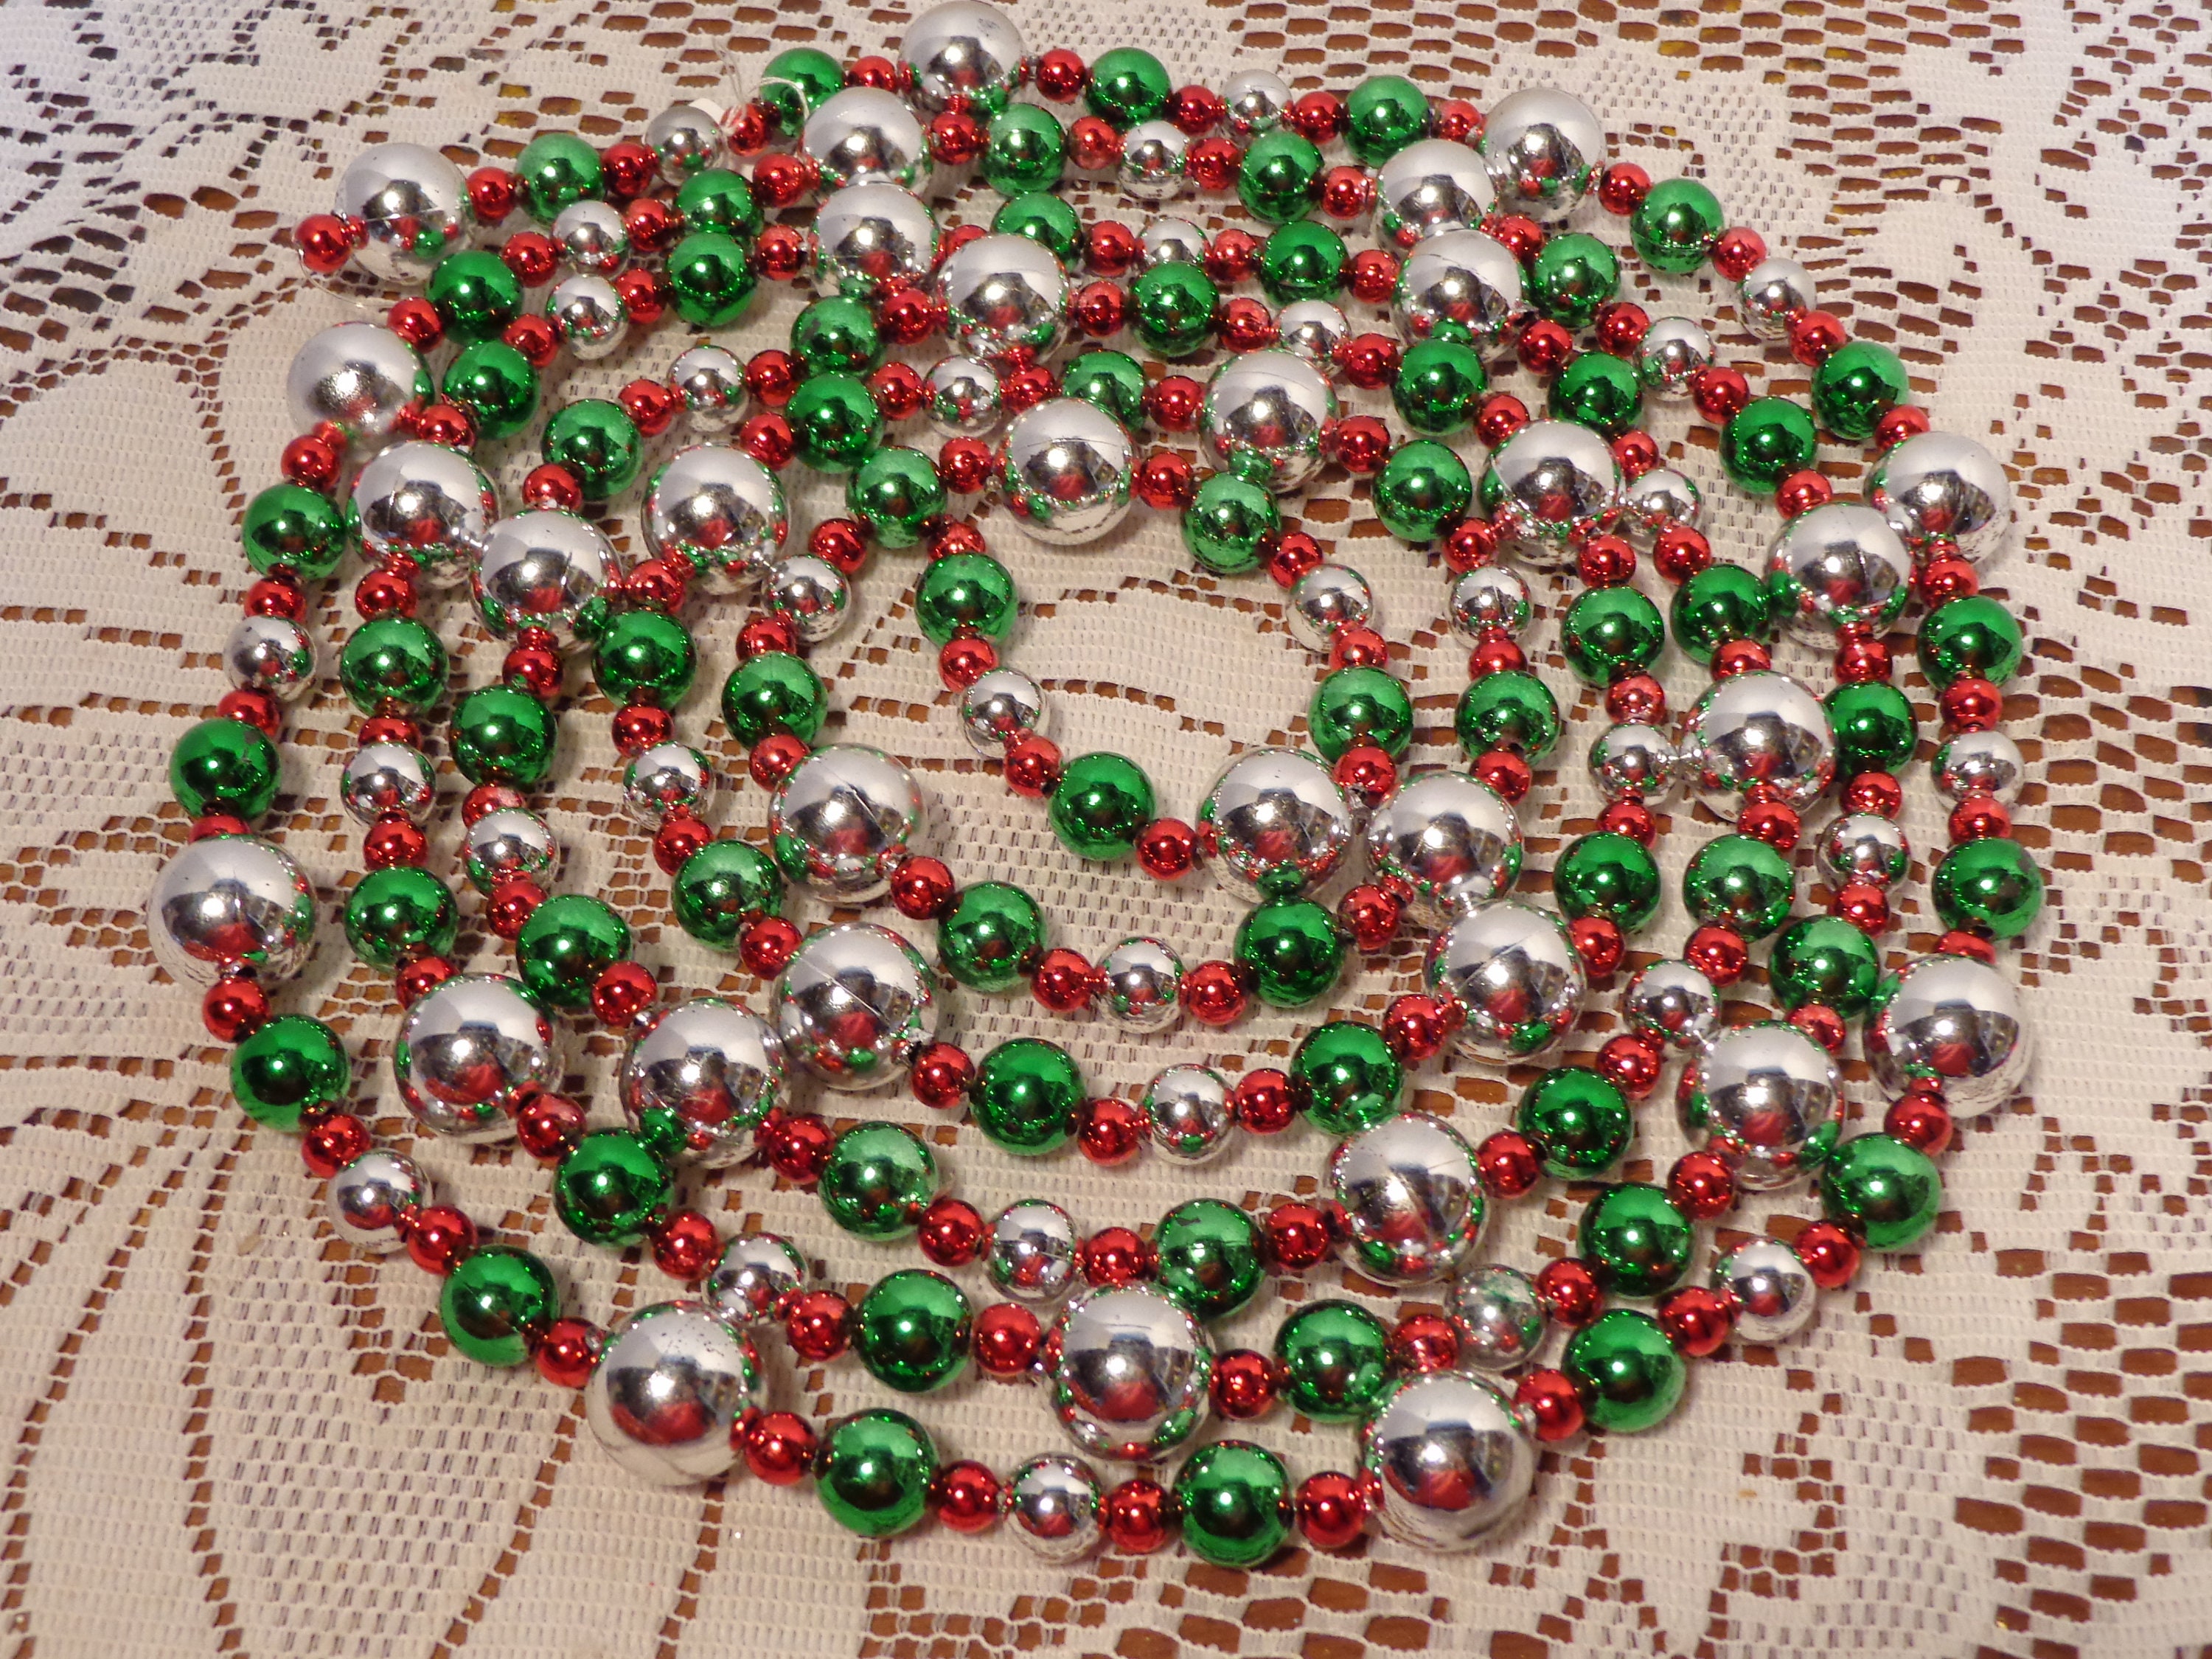 Festive Christmas Tree Bead Garland - 72 Long, Silver, Red & Green Beads